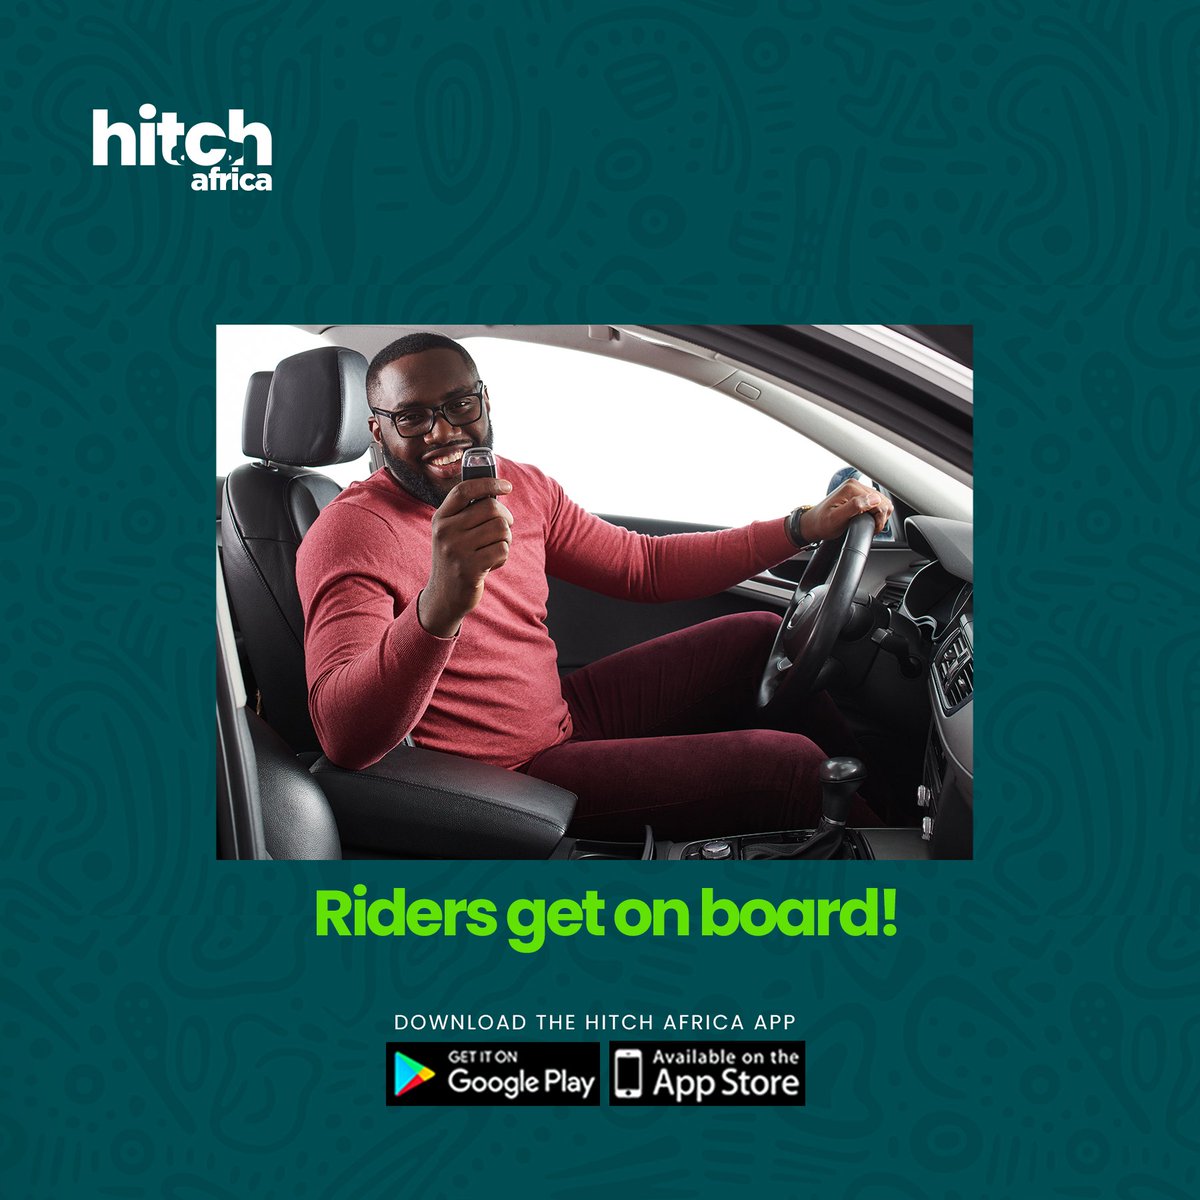 Salary earners we too de greet o🙌

Book a ride using the Hitch Africa app to enjoy amazing discounts today💃

Download the Hitch Africa app on the App store or Google play store now!

#hitchafrica #affordablerides #salaryweek #theweekend #lagos